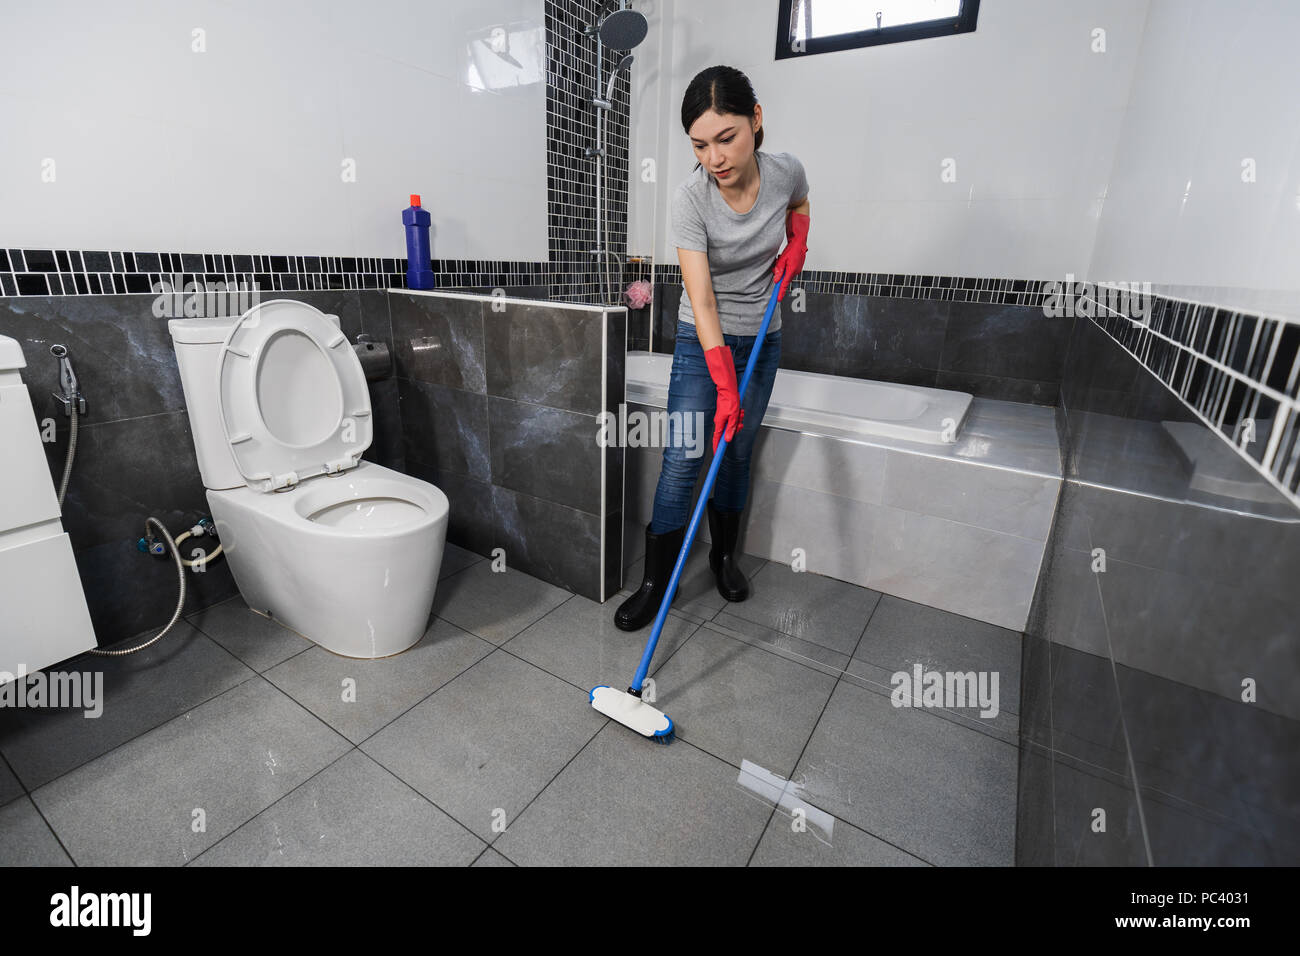 https://c8.alamy.com/comp/PC4031/woman-using-brush-to-cleaning-the-tile-in-the-bathroom-PC4031.jpg